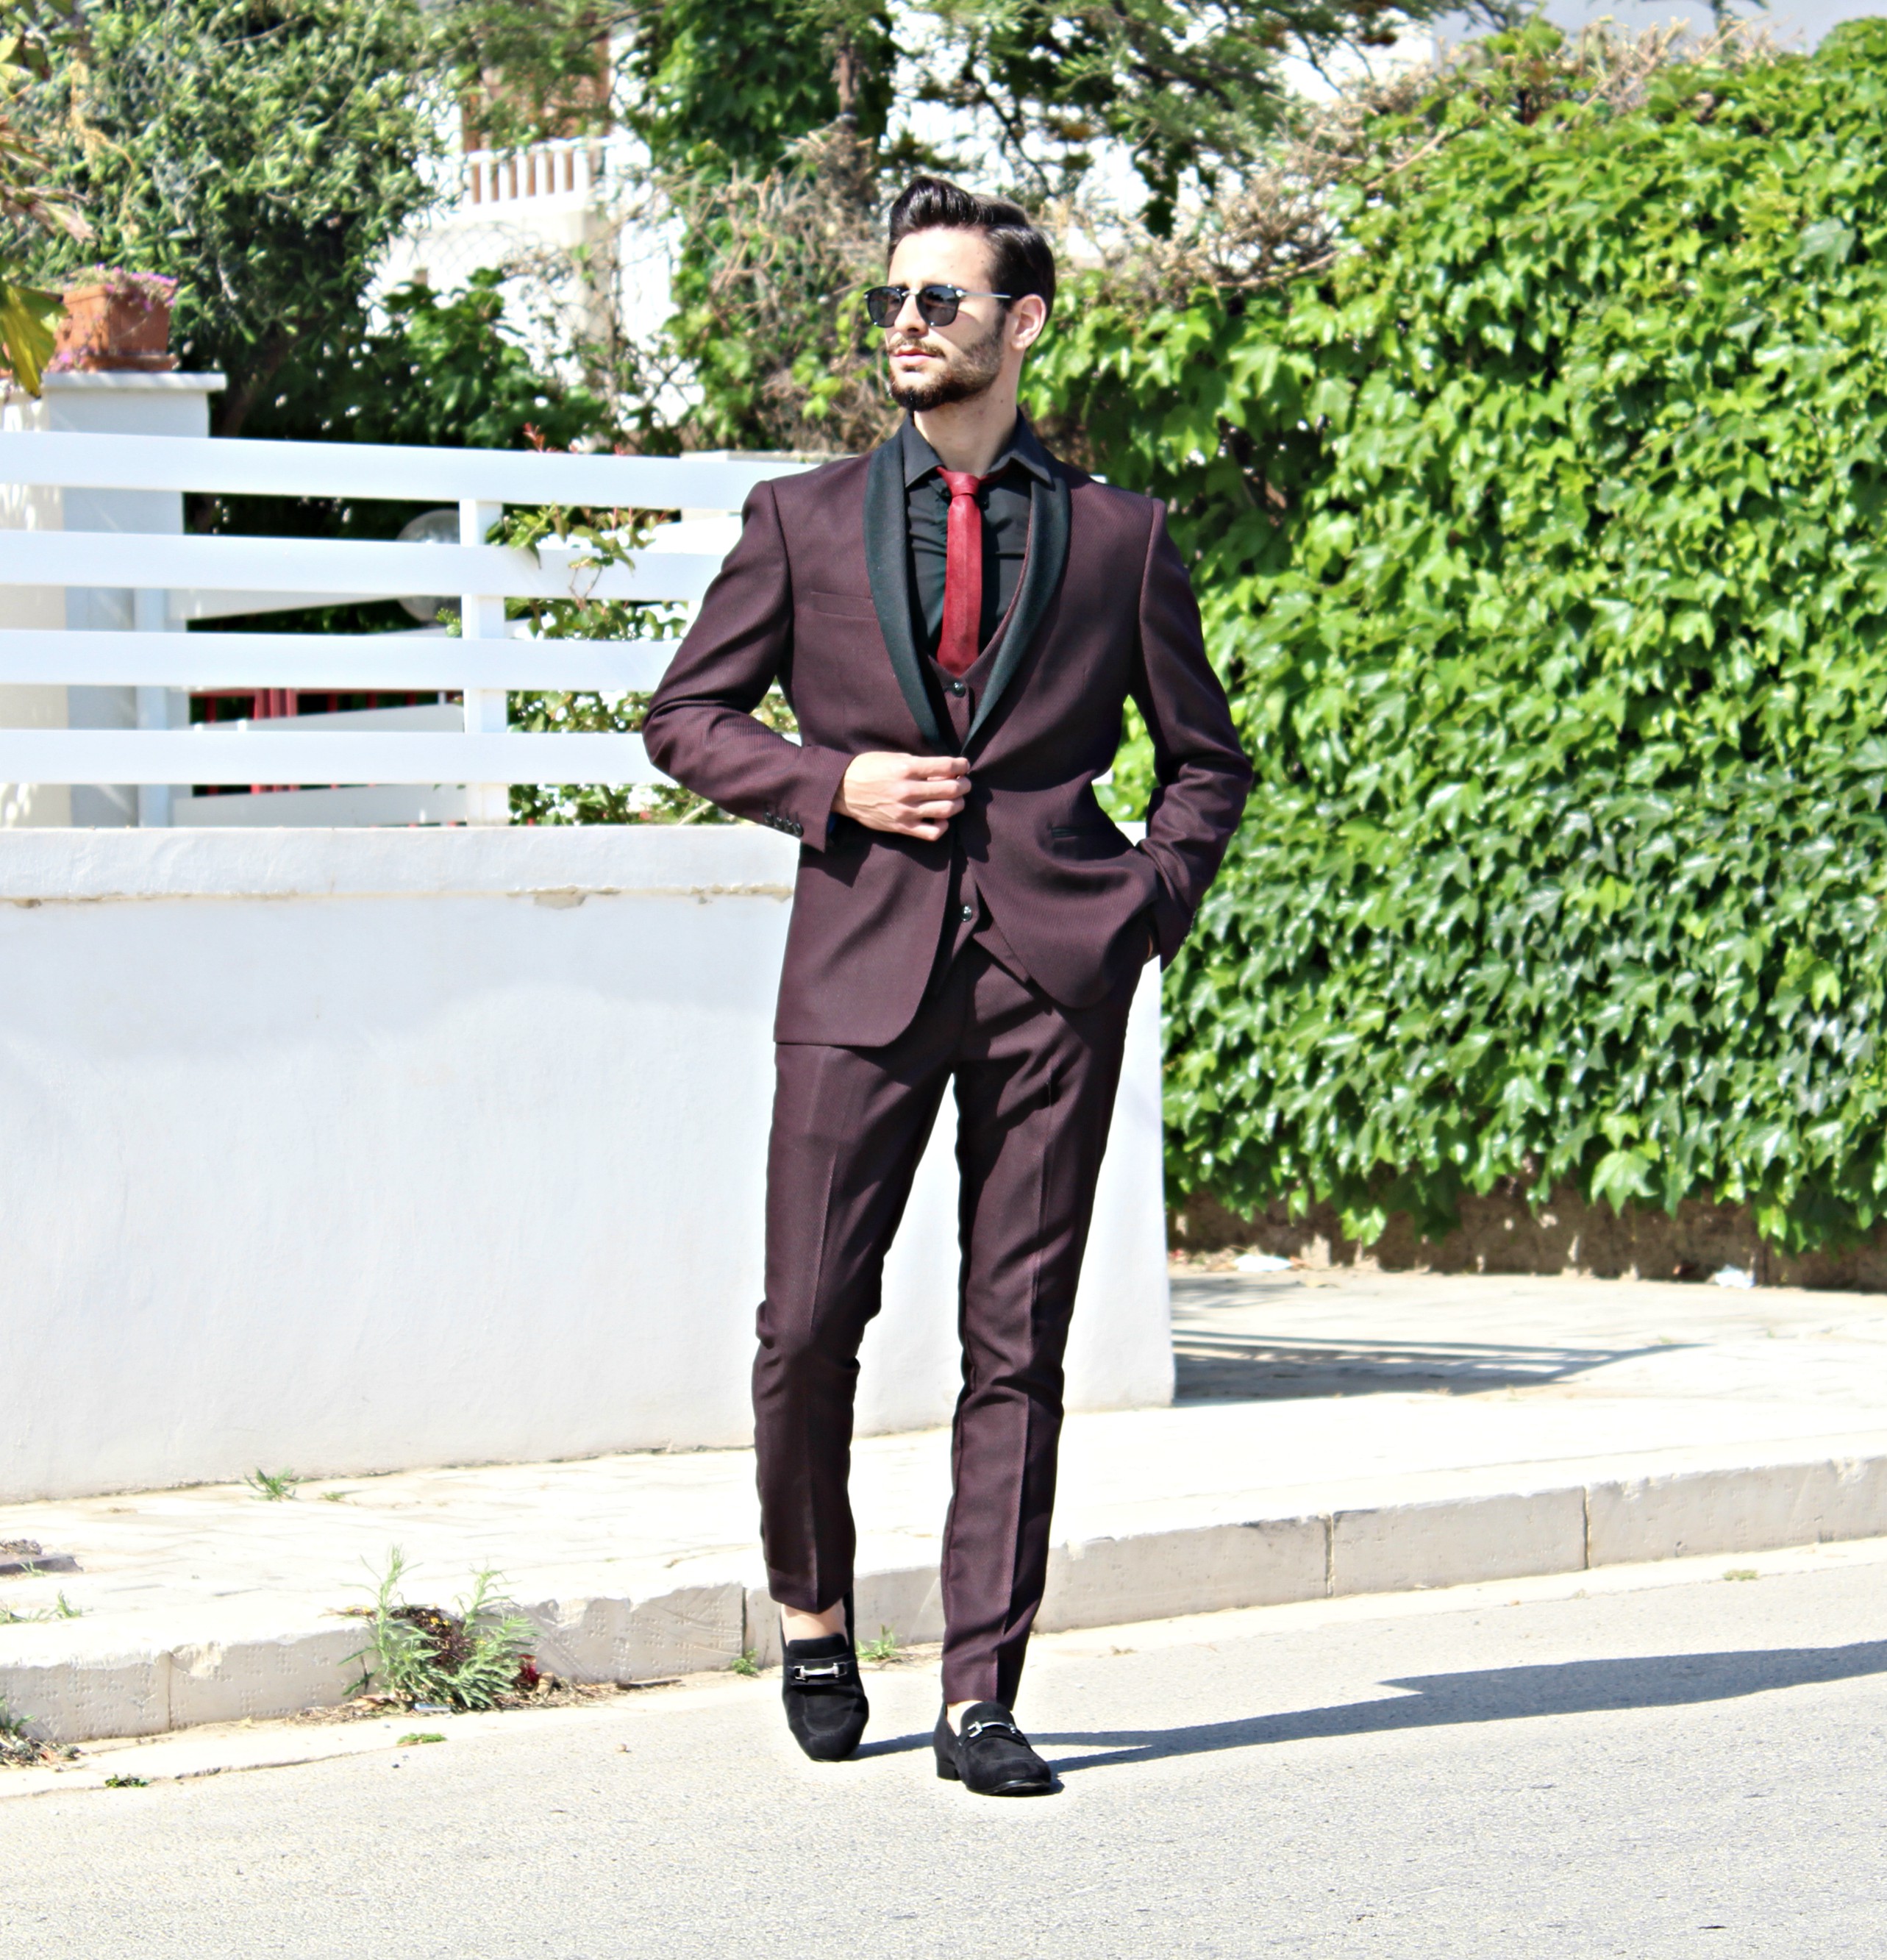 CORRADO FIRERA, OUTFITS, SMART STYLE, FASHION, WINE SUIT, MARC DARCY